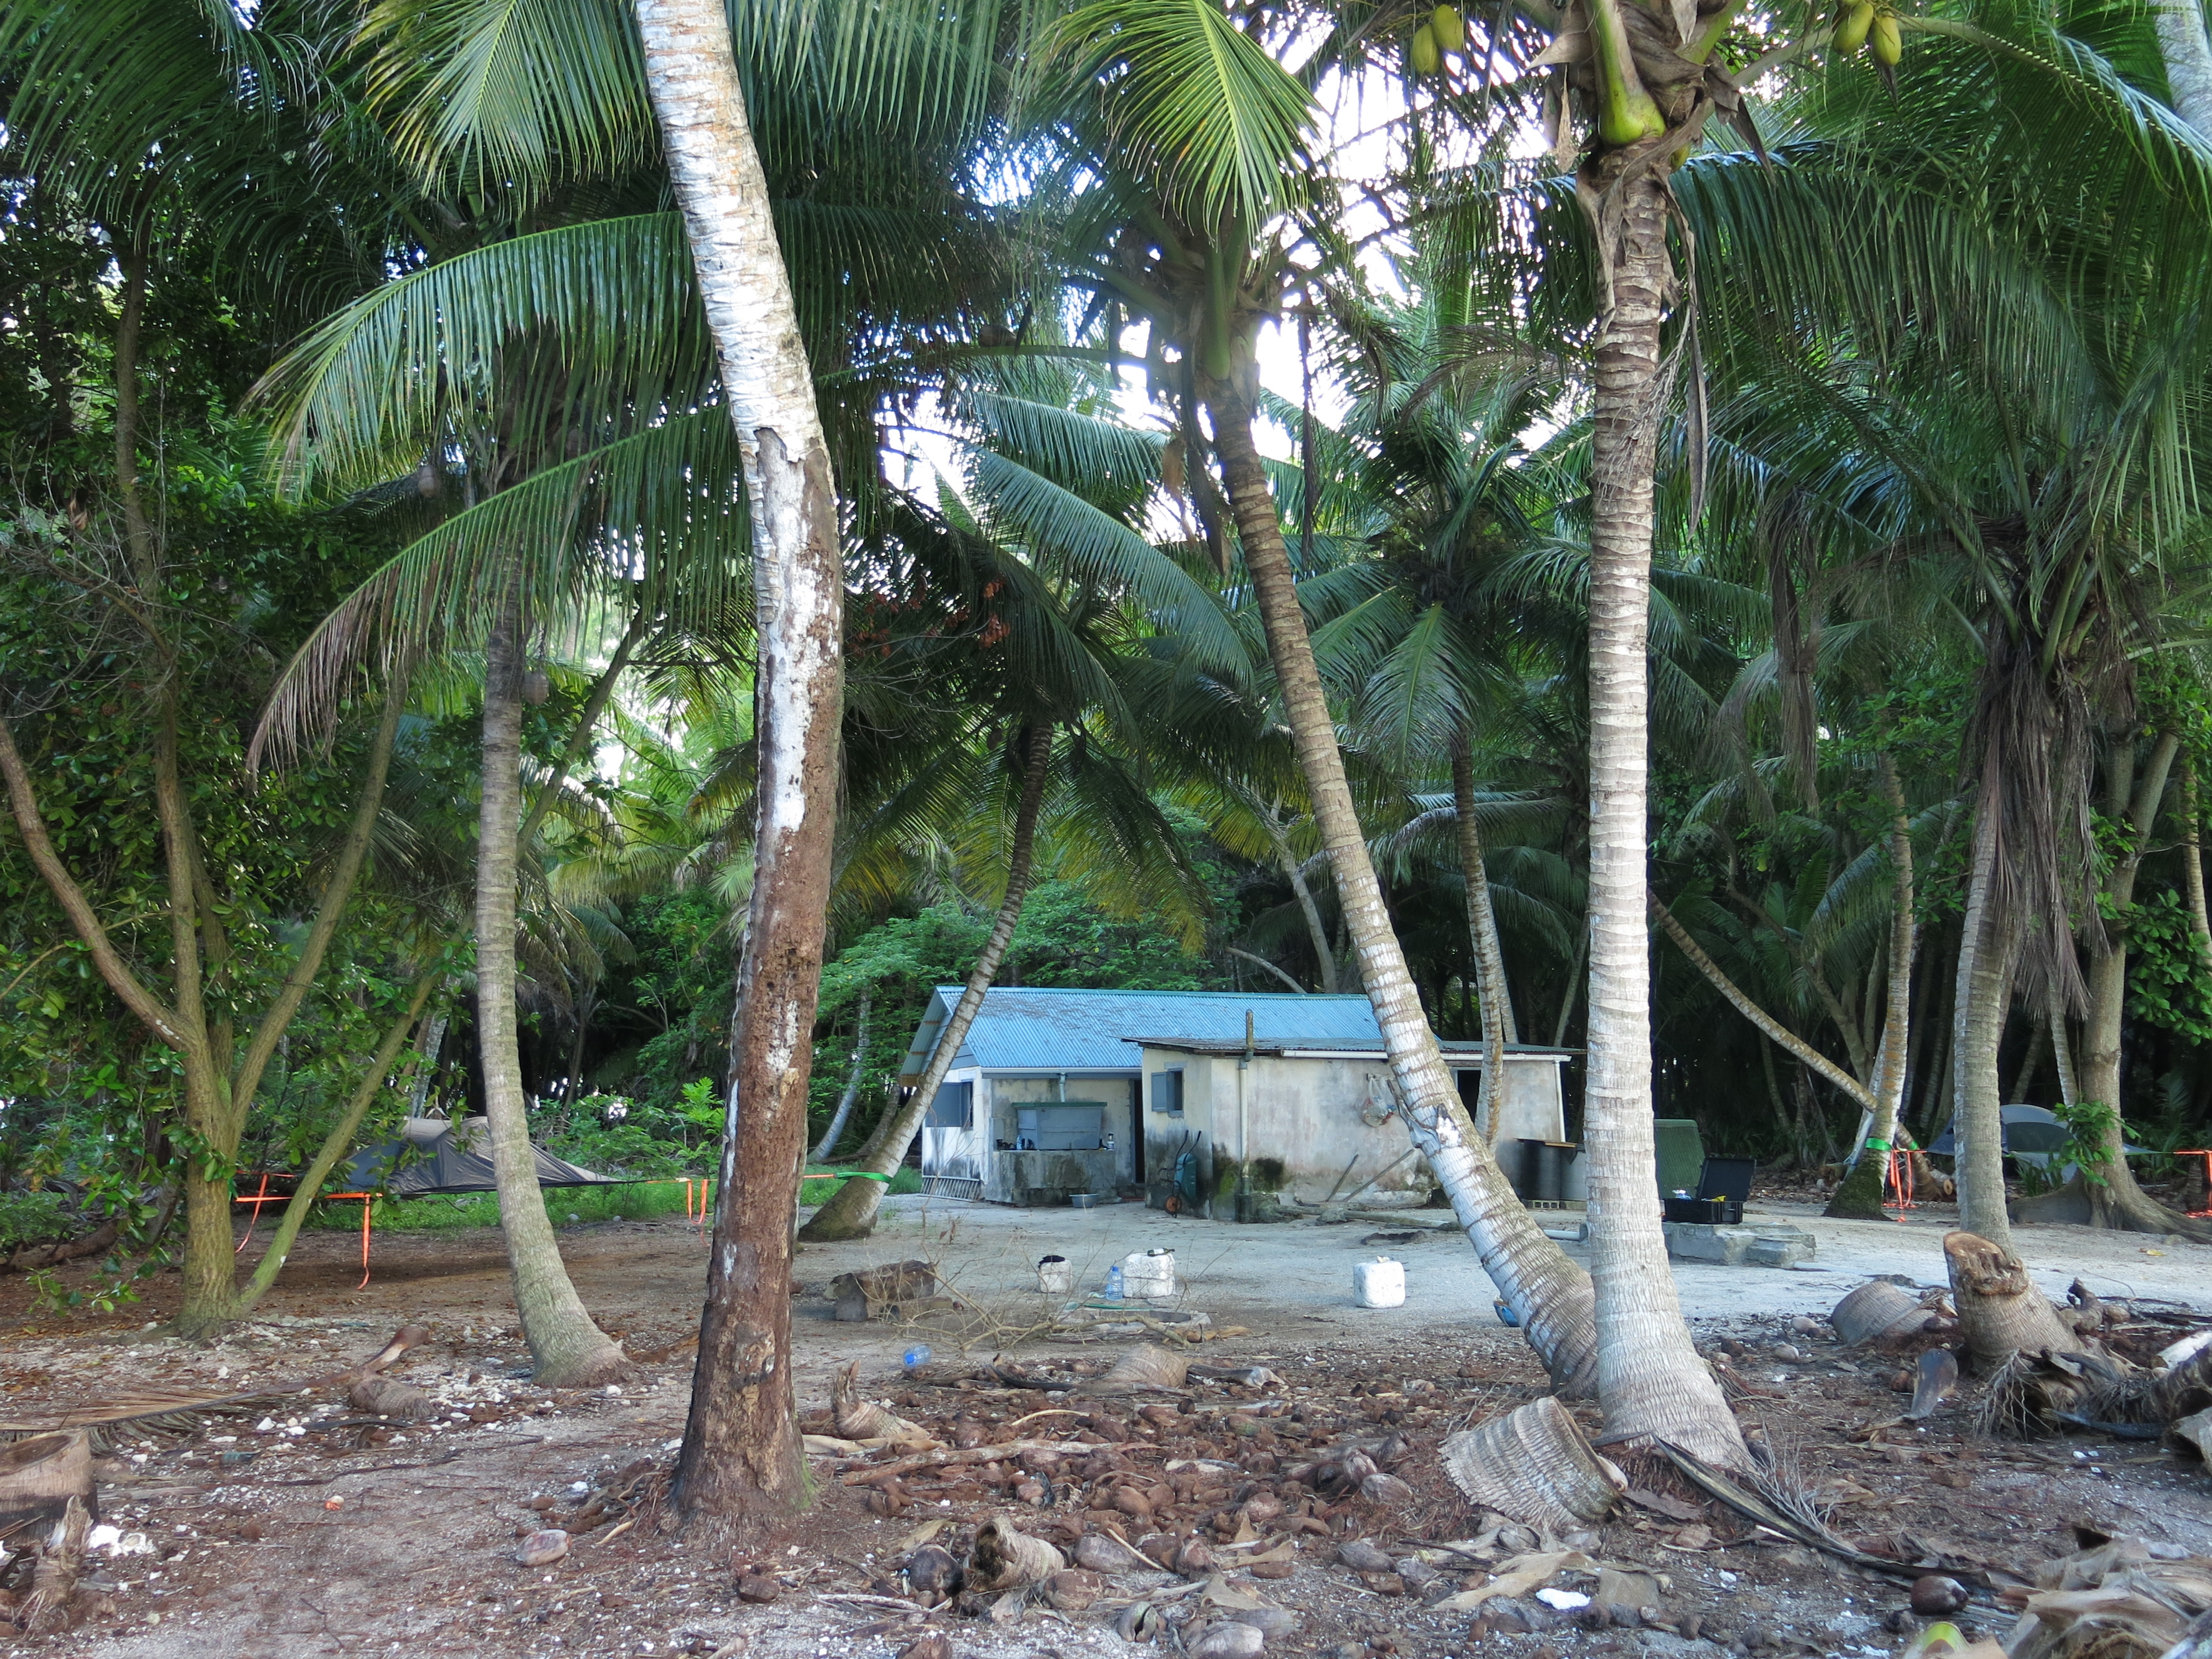  View of the St Joseph camp and the fireplace, seen from the beach. Photo by Sacha di Piazza